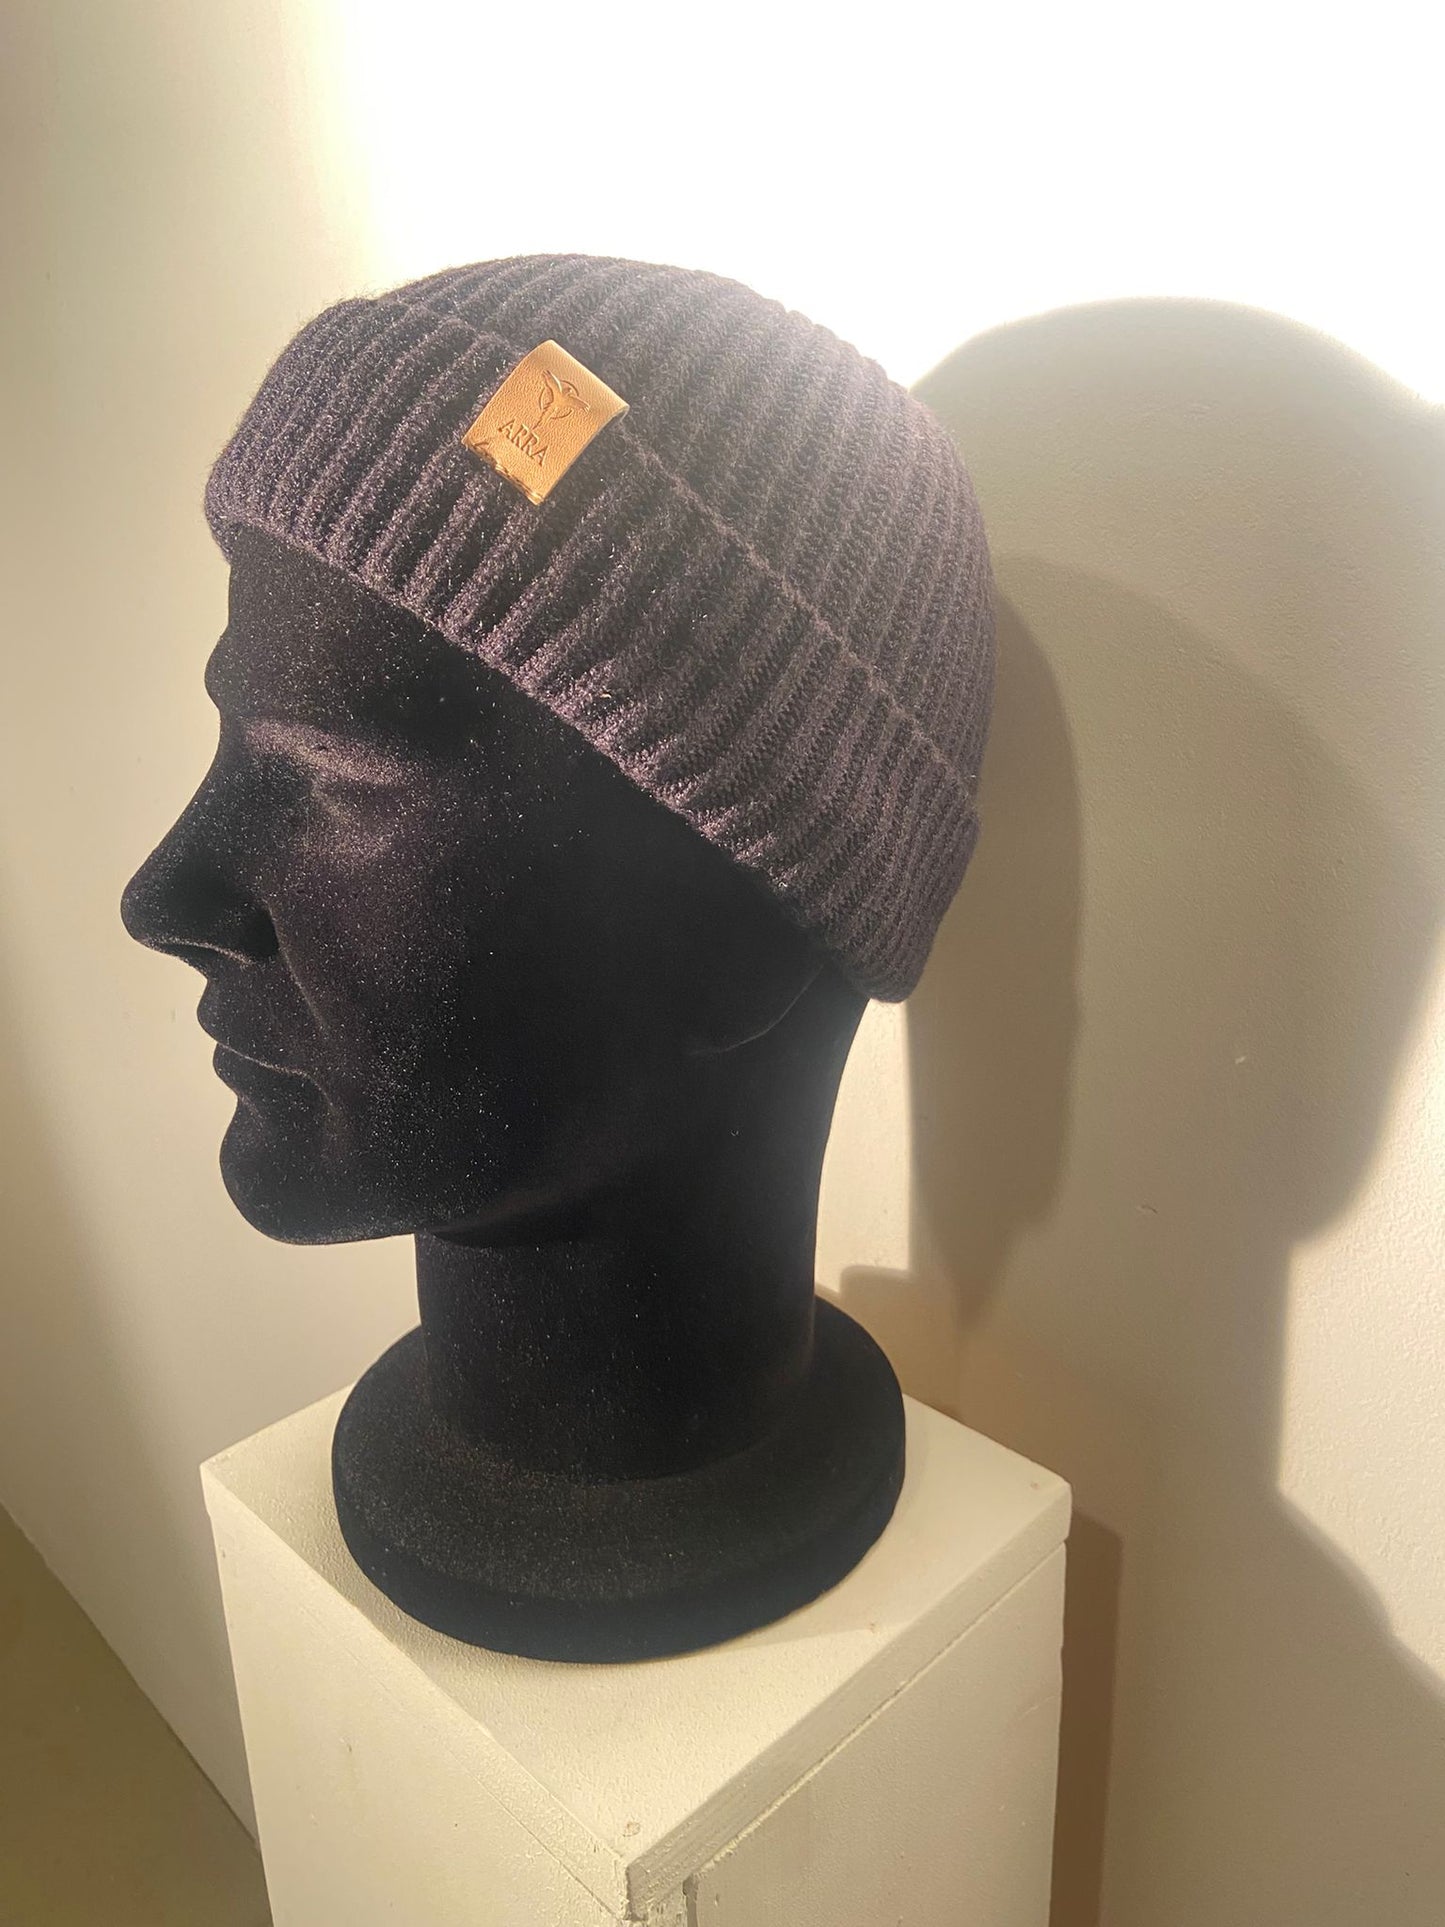 Prepare yourself for the winter with the "ARRA Beanies collection"